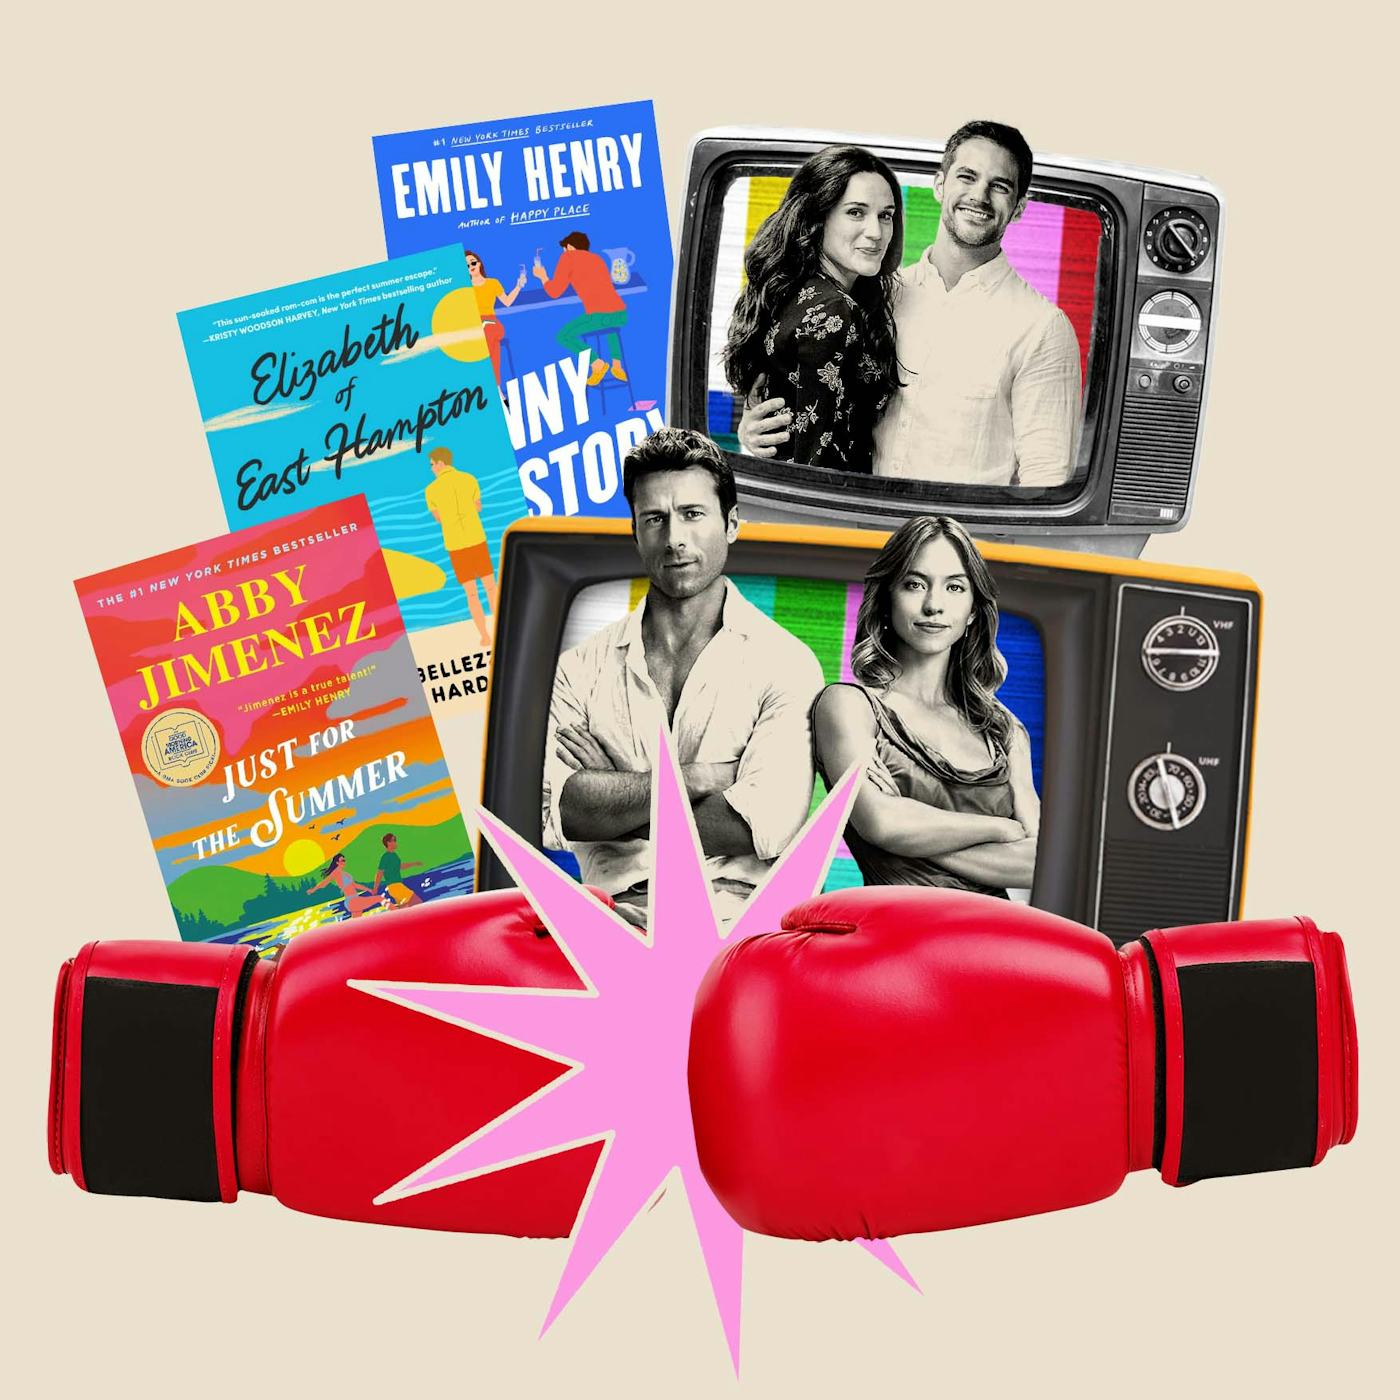 A collage featuring romantic novel covers, two boxing gloves, and a pair of TVs showcasing a smiling couple and two actors.